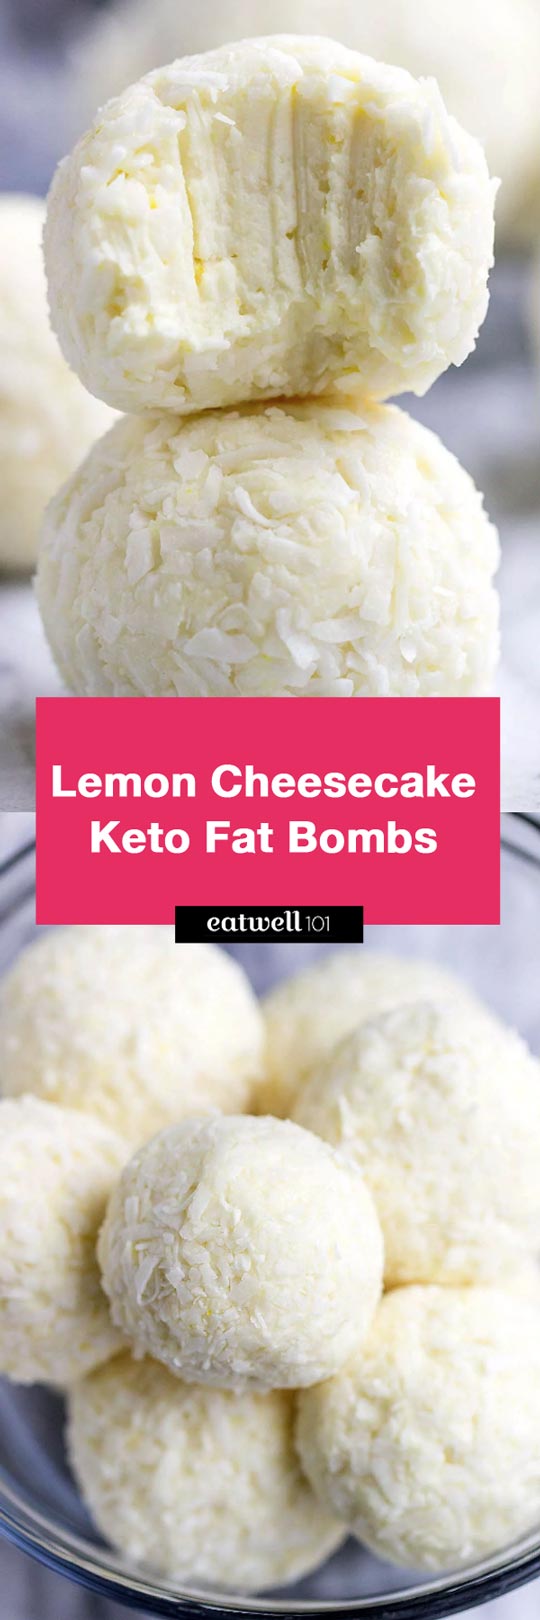 Lemon Cheesecake Keto Fat Bombs - These low-carb, keto fat-bombs are an easy, no-bake frozen treat you can make with simple ingredients. #eatwell101 #recipe #Lemon #Cheesecake #Keto #FatBombs #Lowcarb